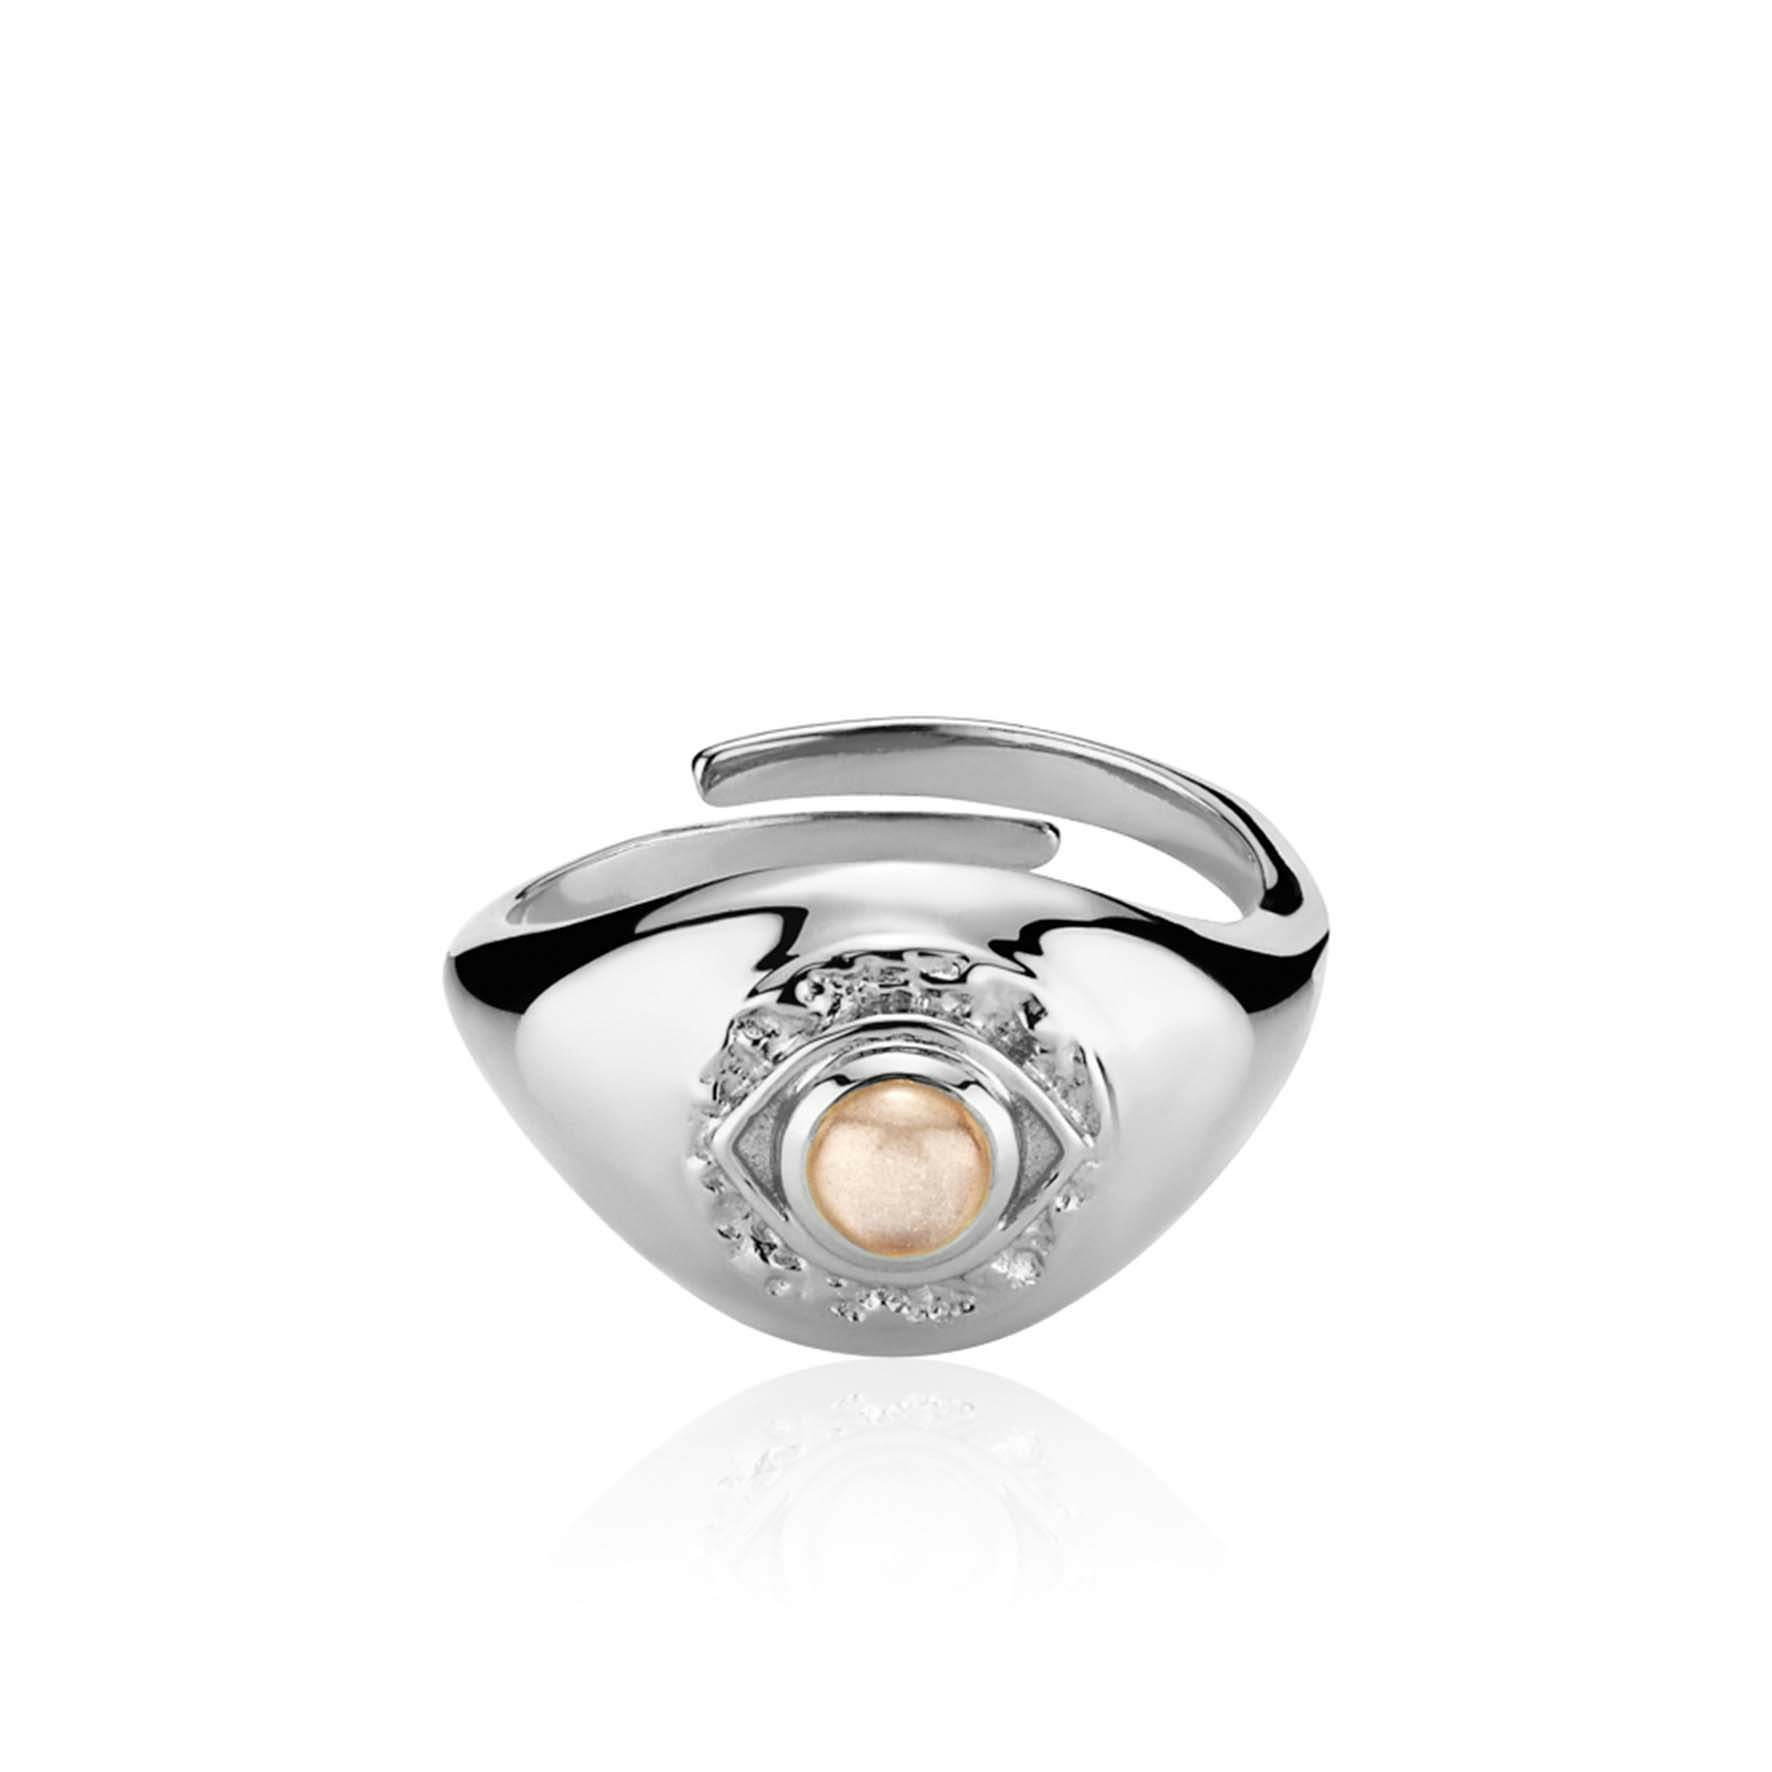 Hanna Martine by Sistie Ring from Sistie in Silver Sterling 925||Blank